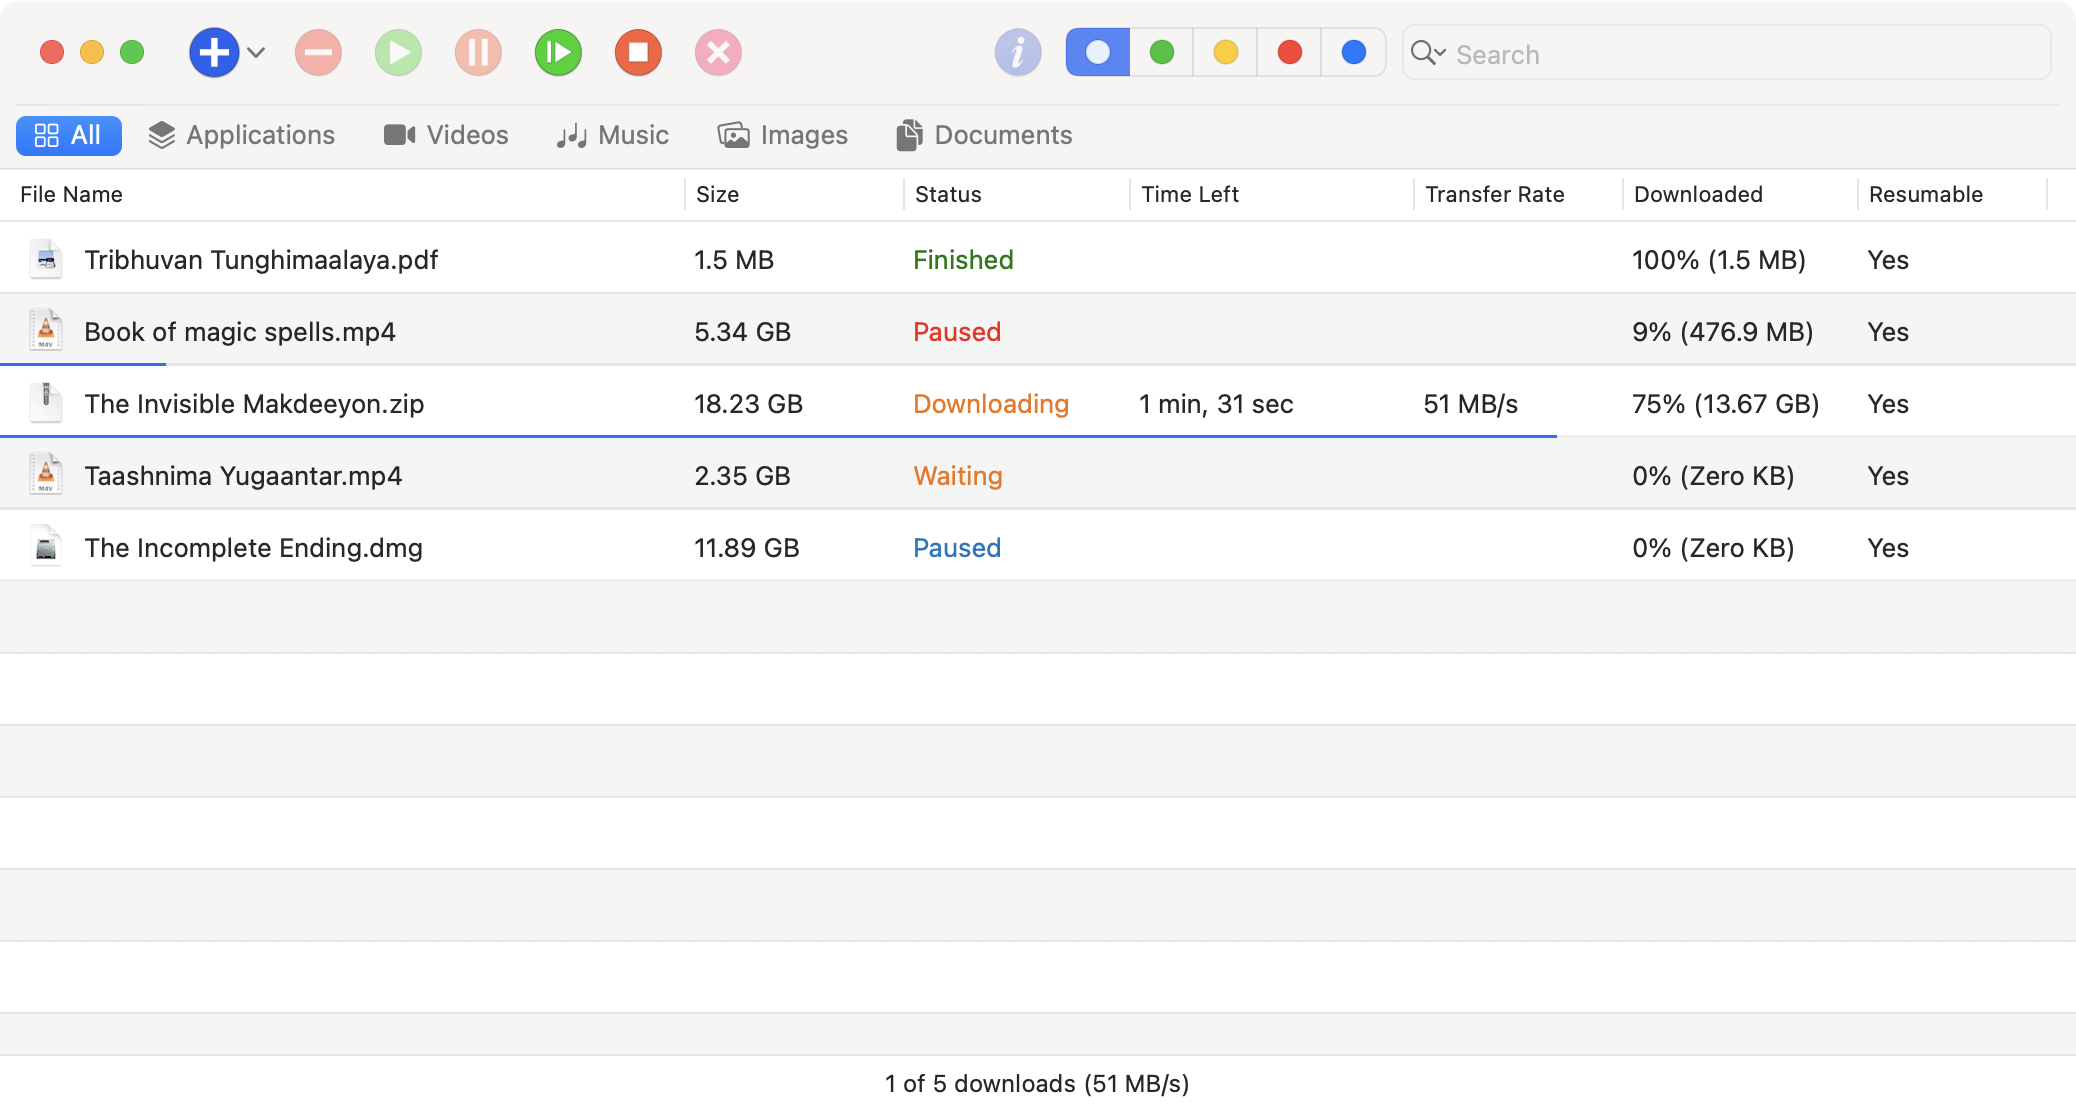 jDM download manager for Mac